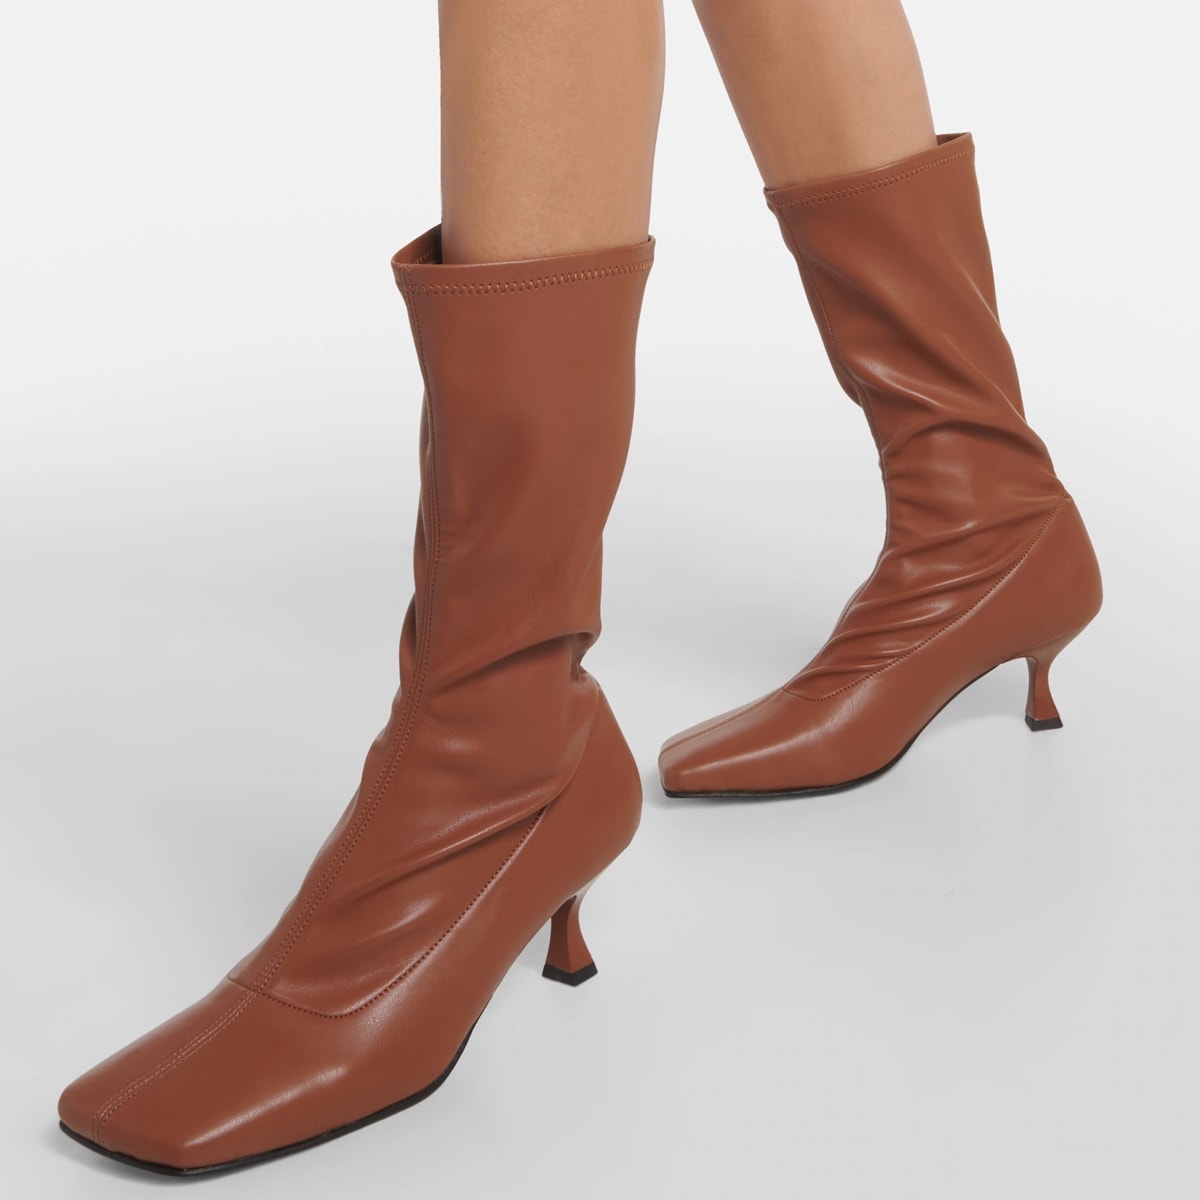 These Souliers Martinez Lola faux leather ankle boots feature a squared toe and stable, comfortable heels that give them an intense yet feminine look